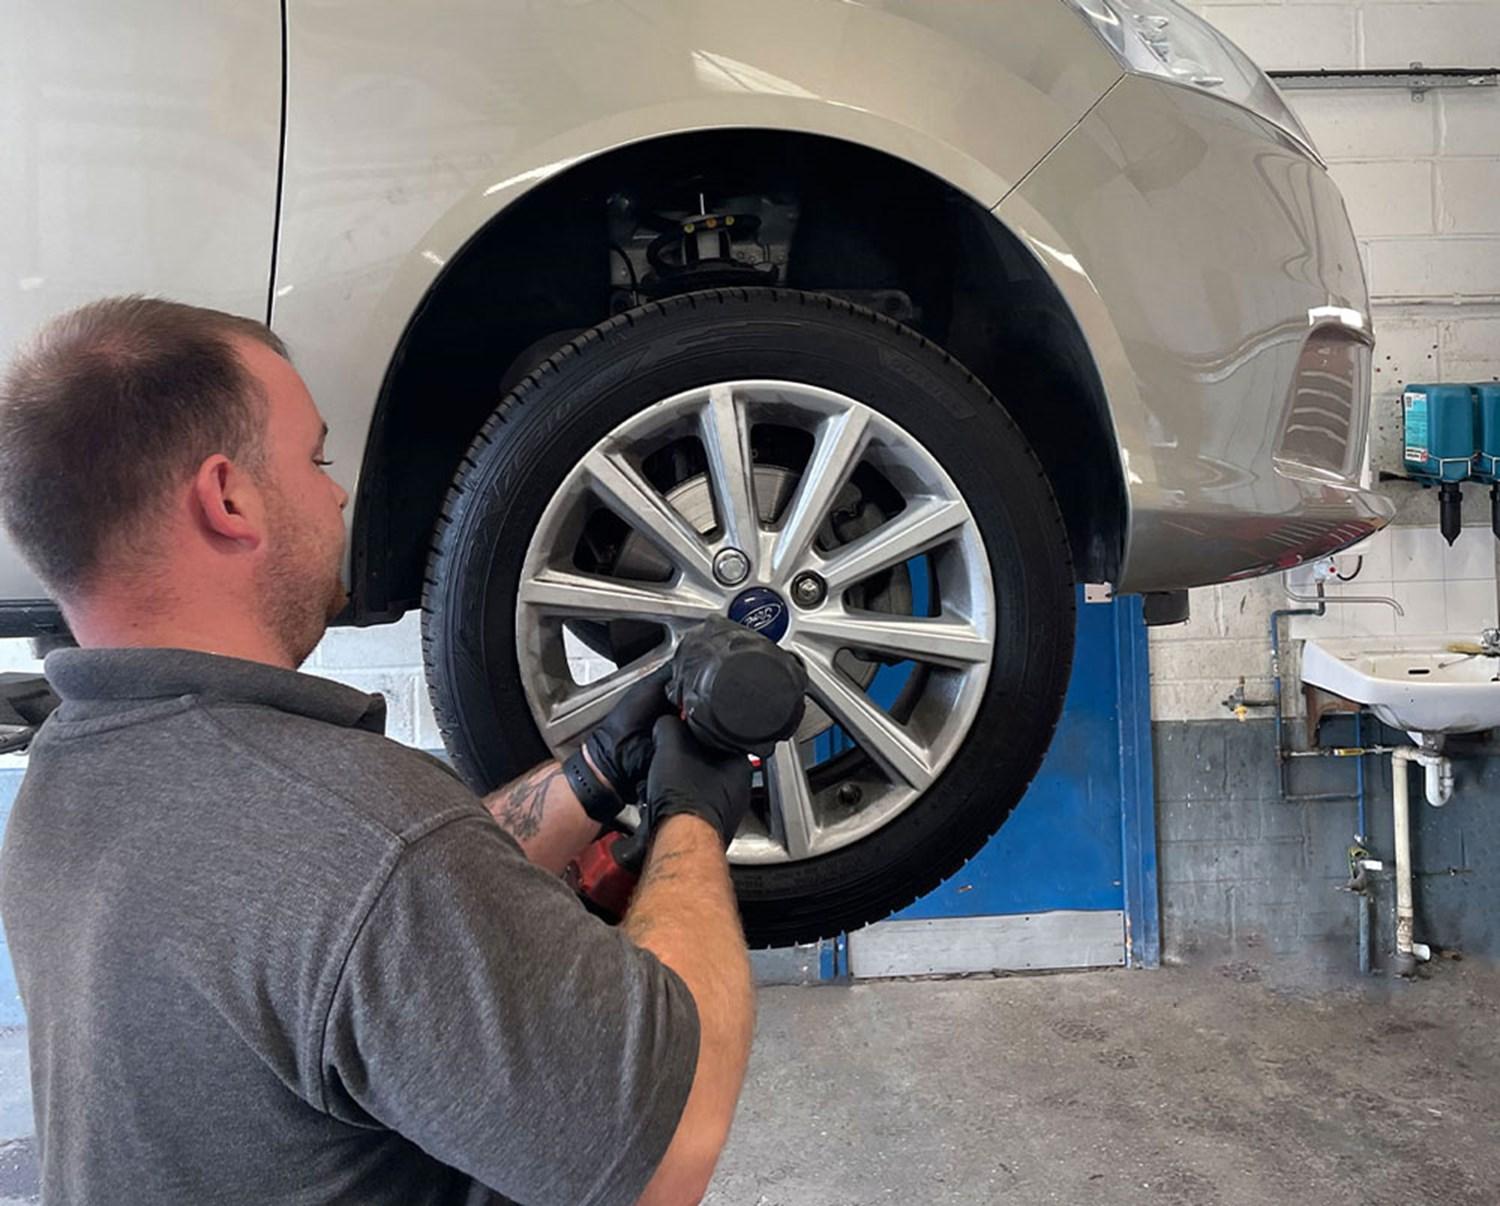 modern and well-equipped car service centre in norwich. Certified technicians performing inspections with precision and expertise, ensuring your vehicle meets the highest safety and compliance standards.